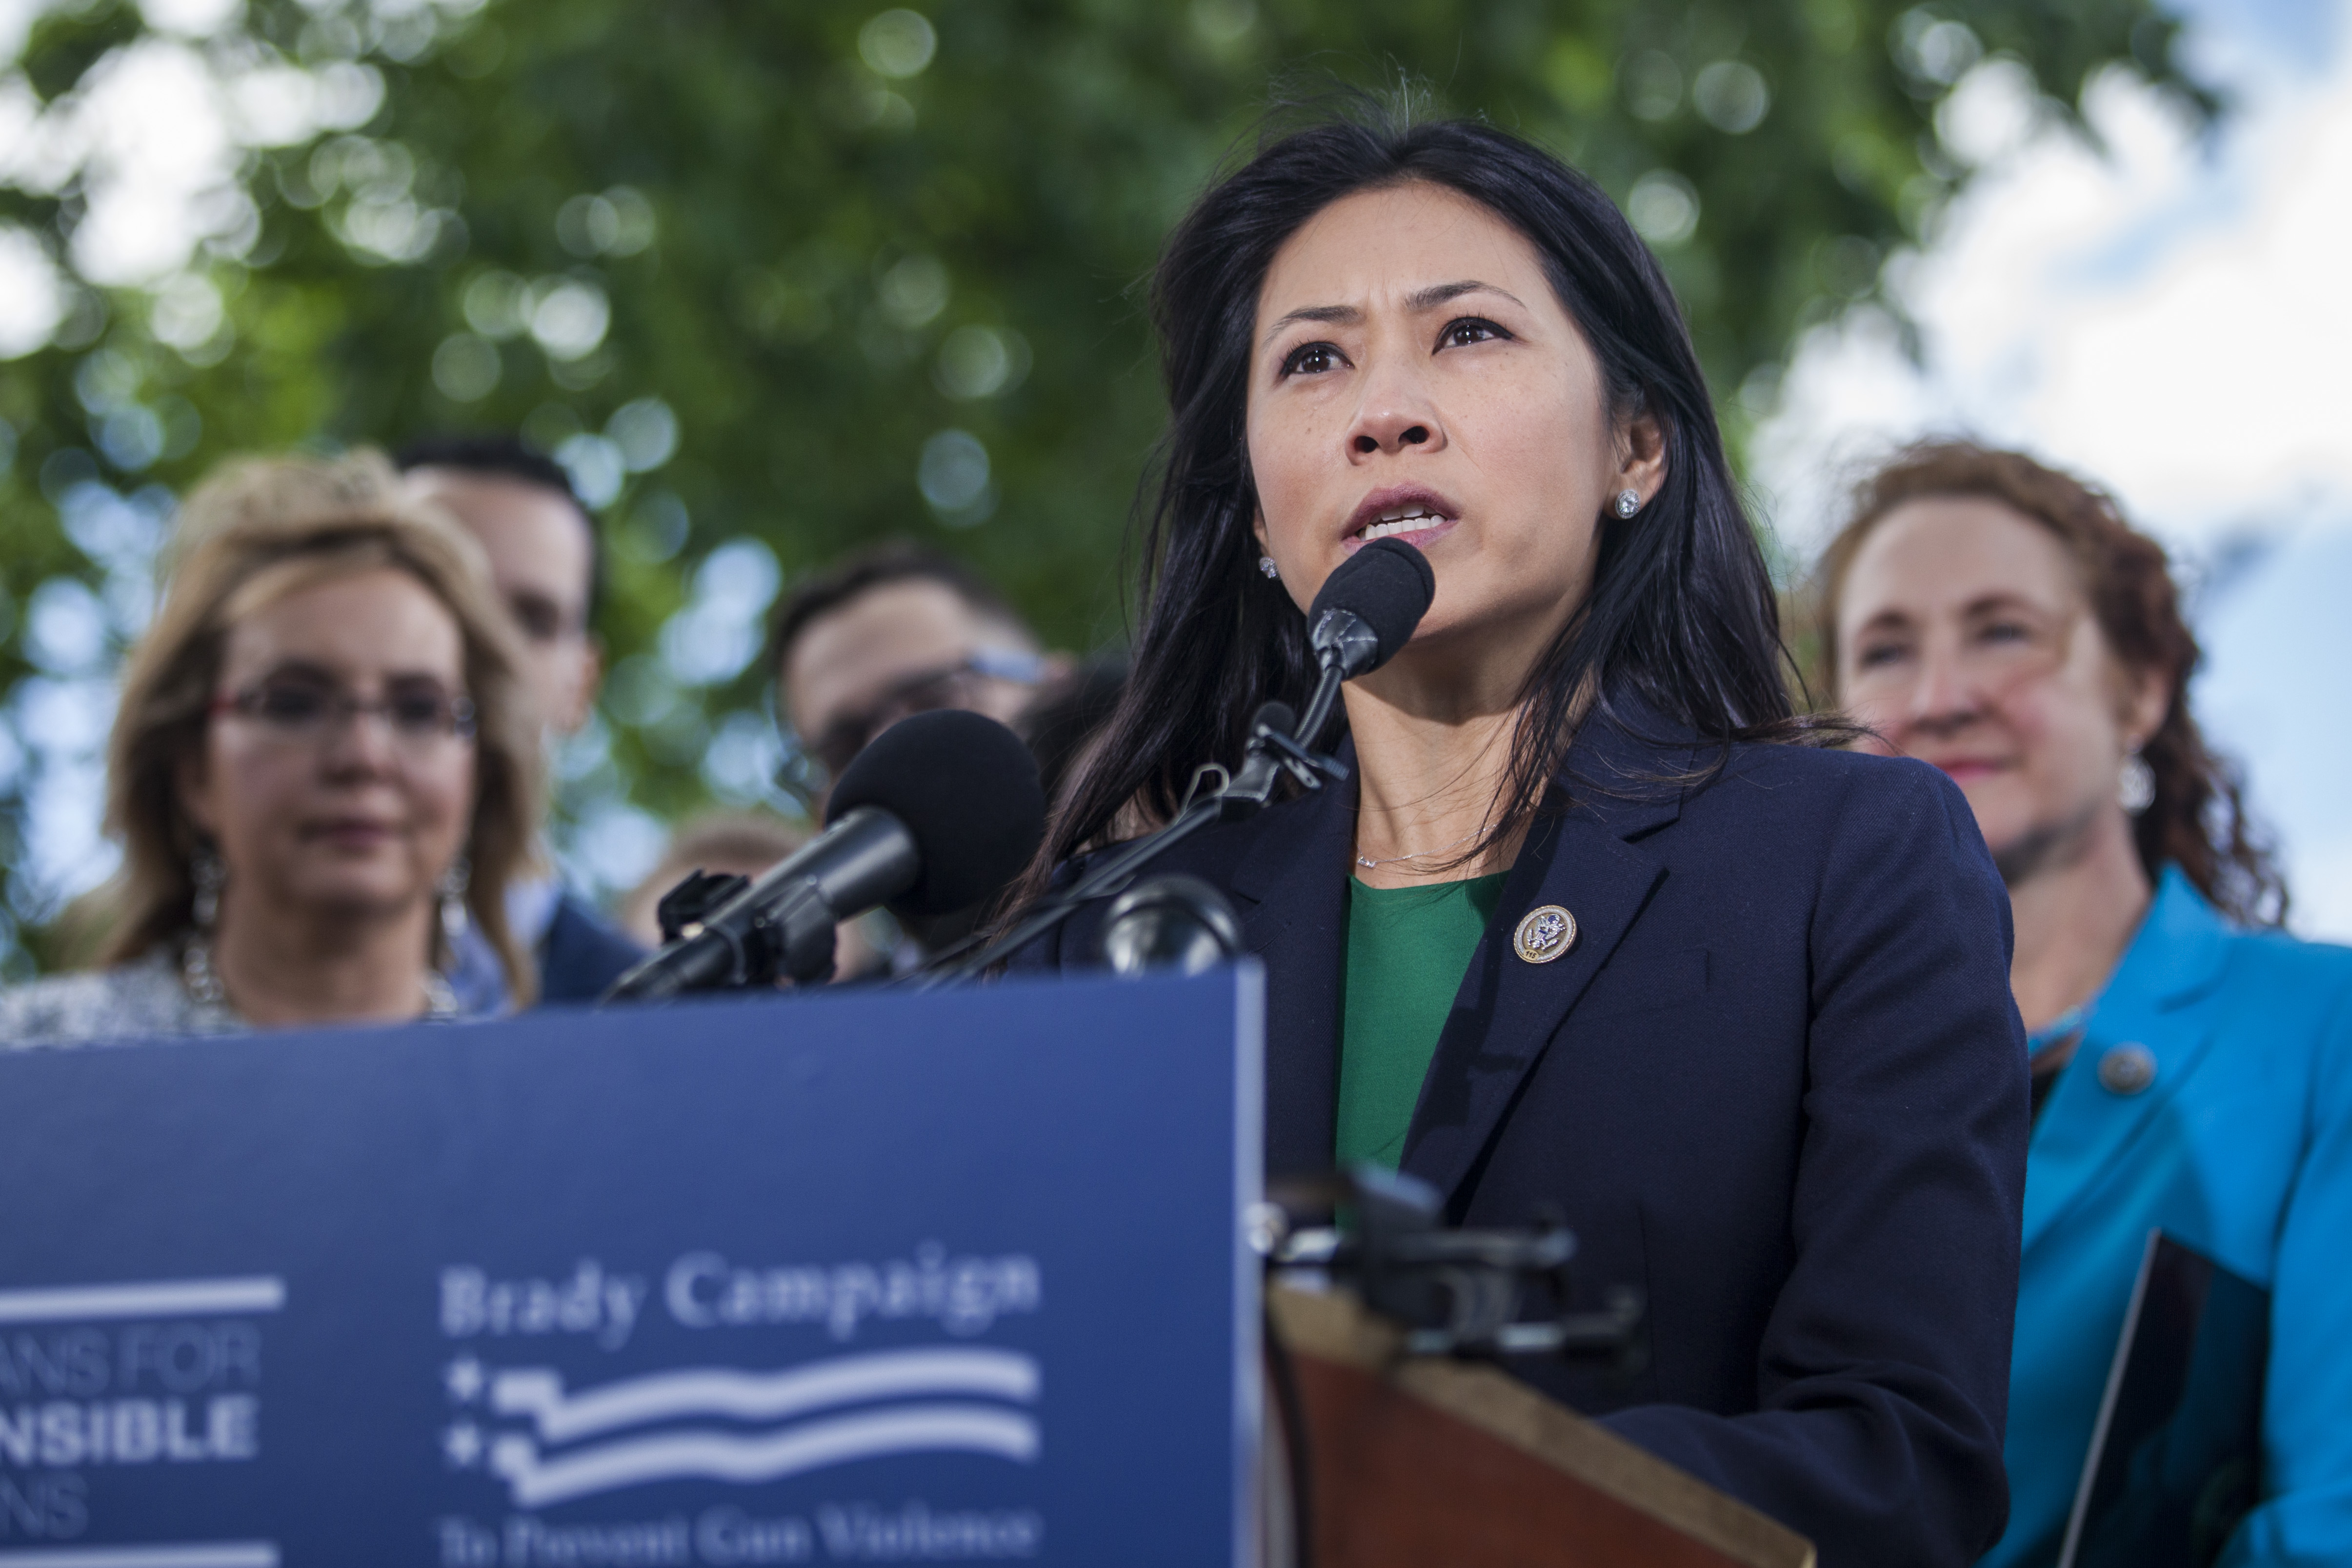 Rep. Stephanie Murphy speaks during a press conference on gun safety on Capitol Hill on May 3, 2017 in Washington, DC. (Photo by Zach Gibson/Getty Images)